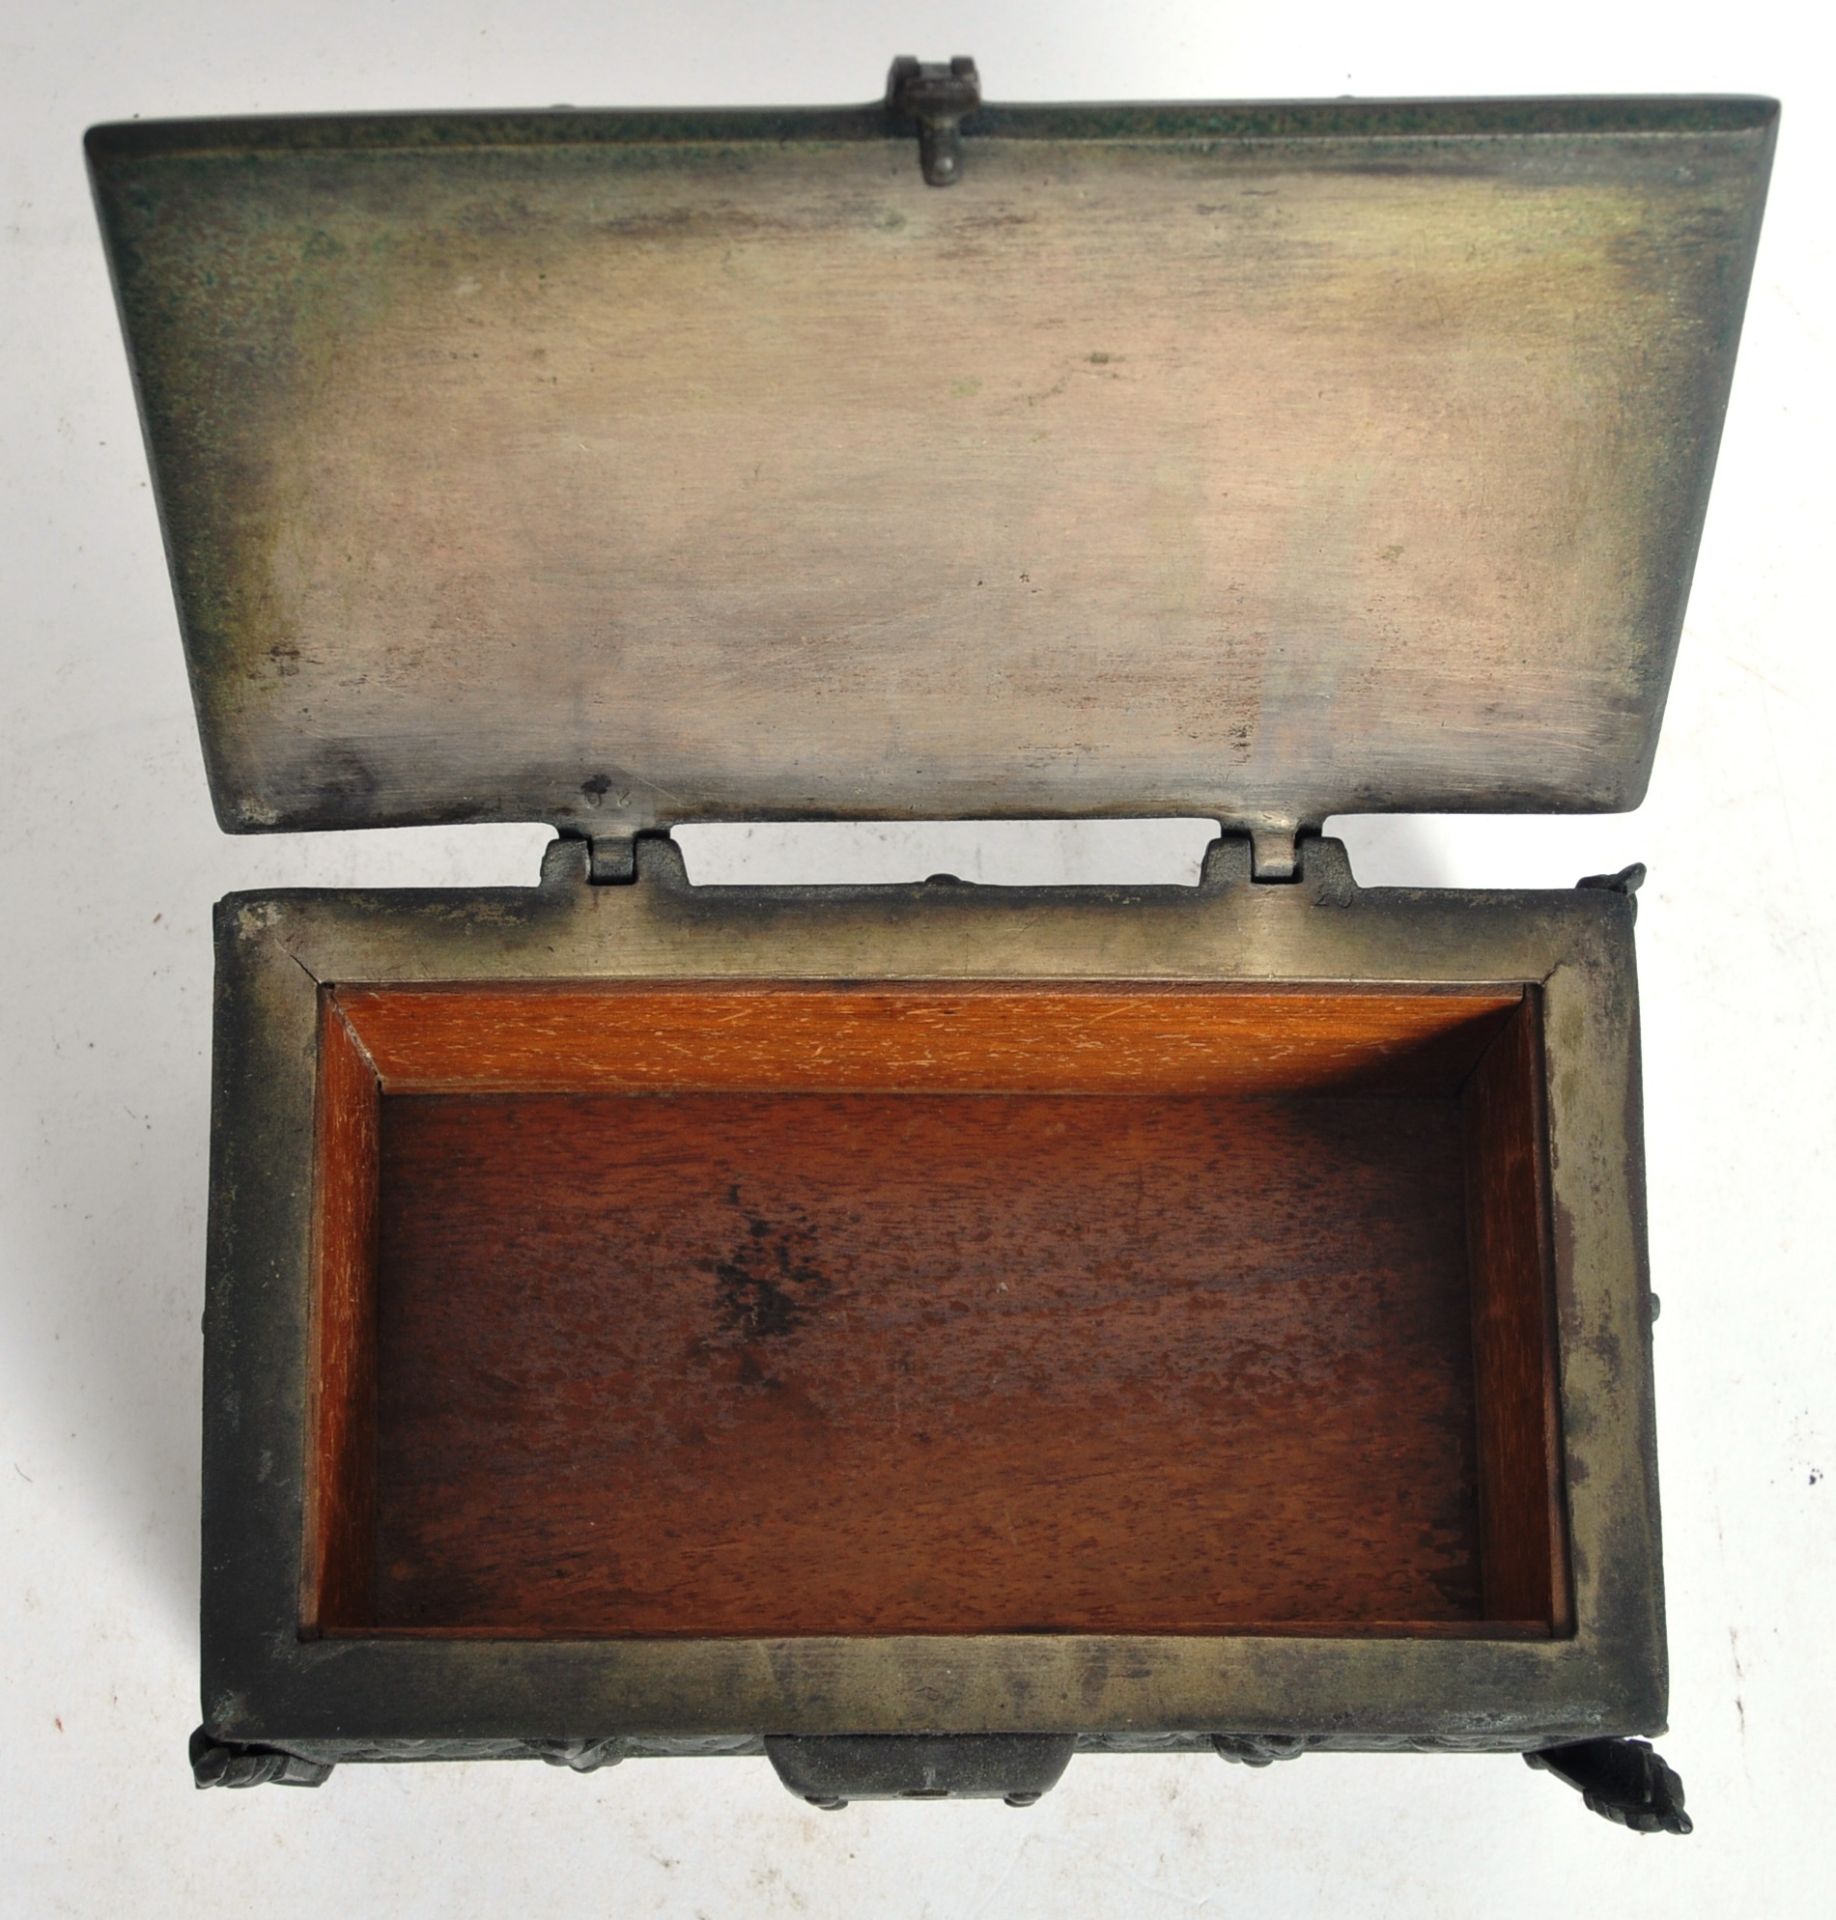 SMALL NINETEENTH CENTURY BRONZE CASKET WITH GOTHIC INLAY - Image 5 of 7